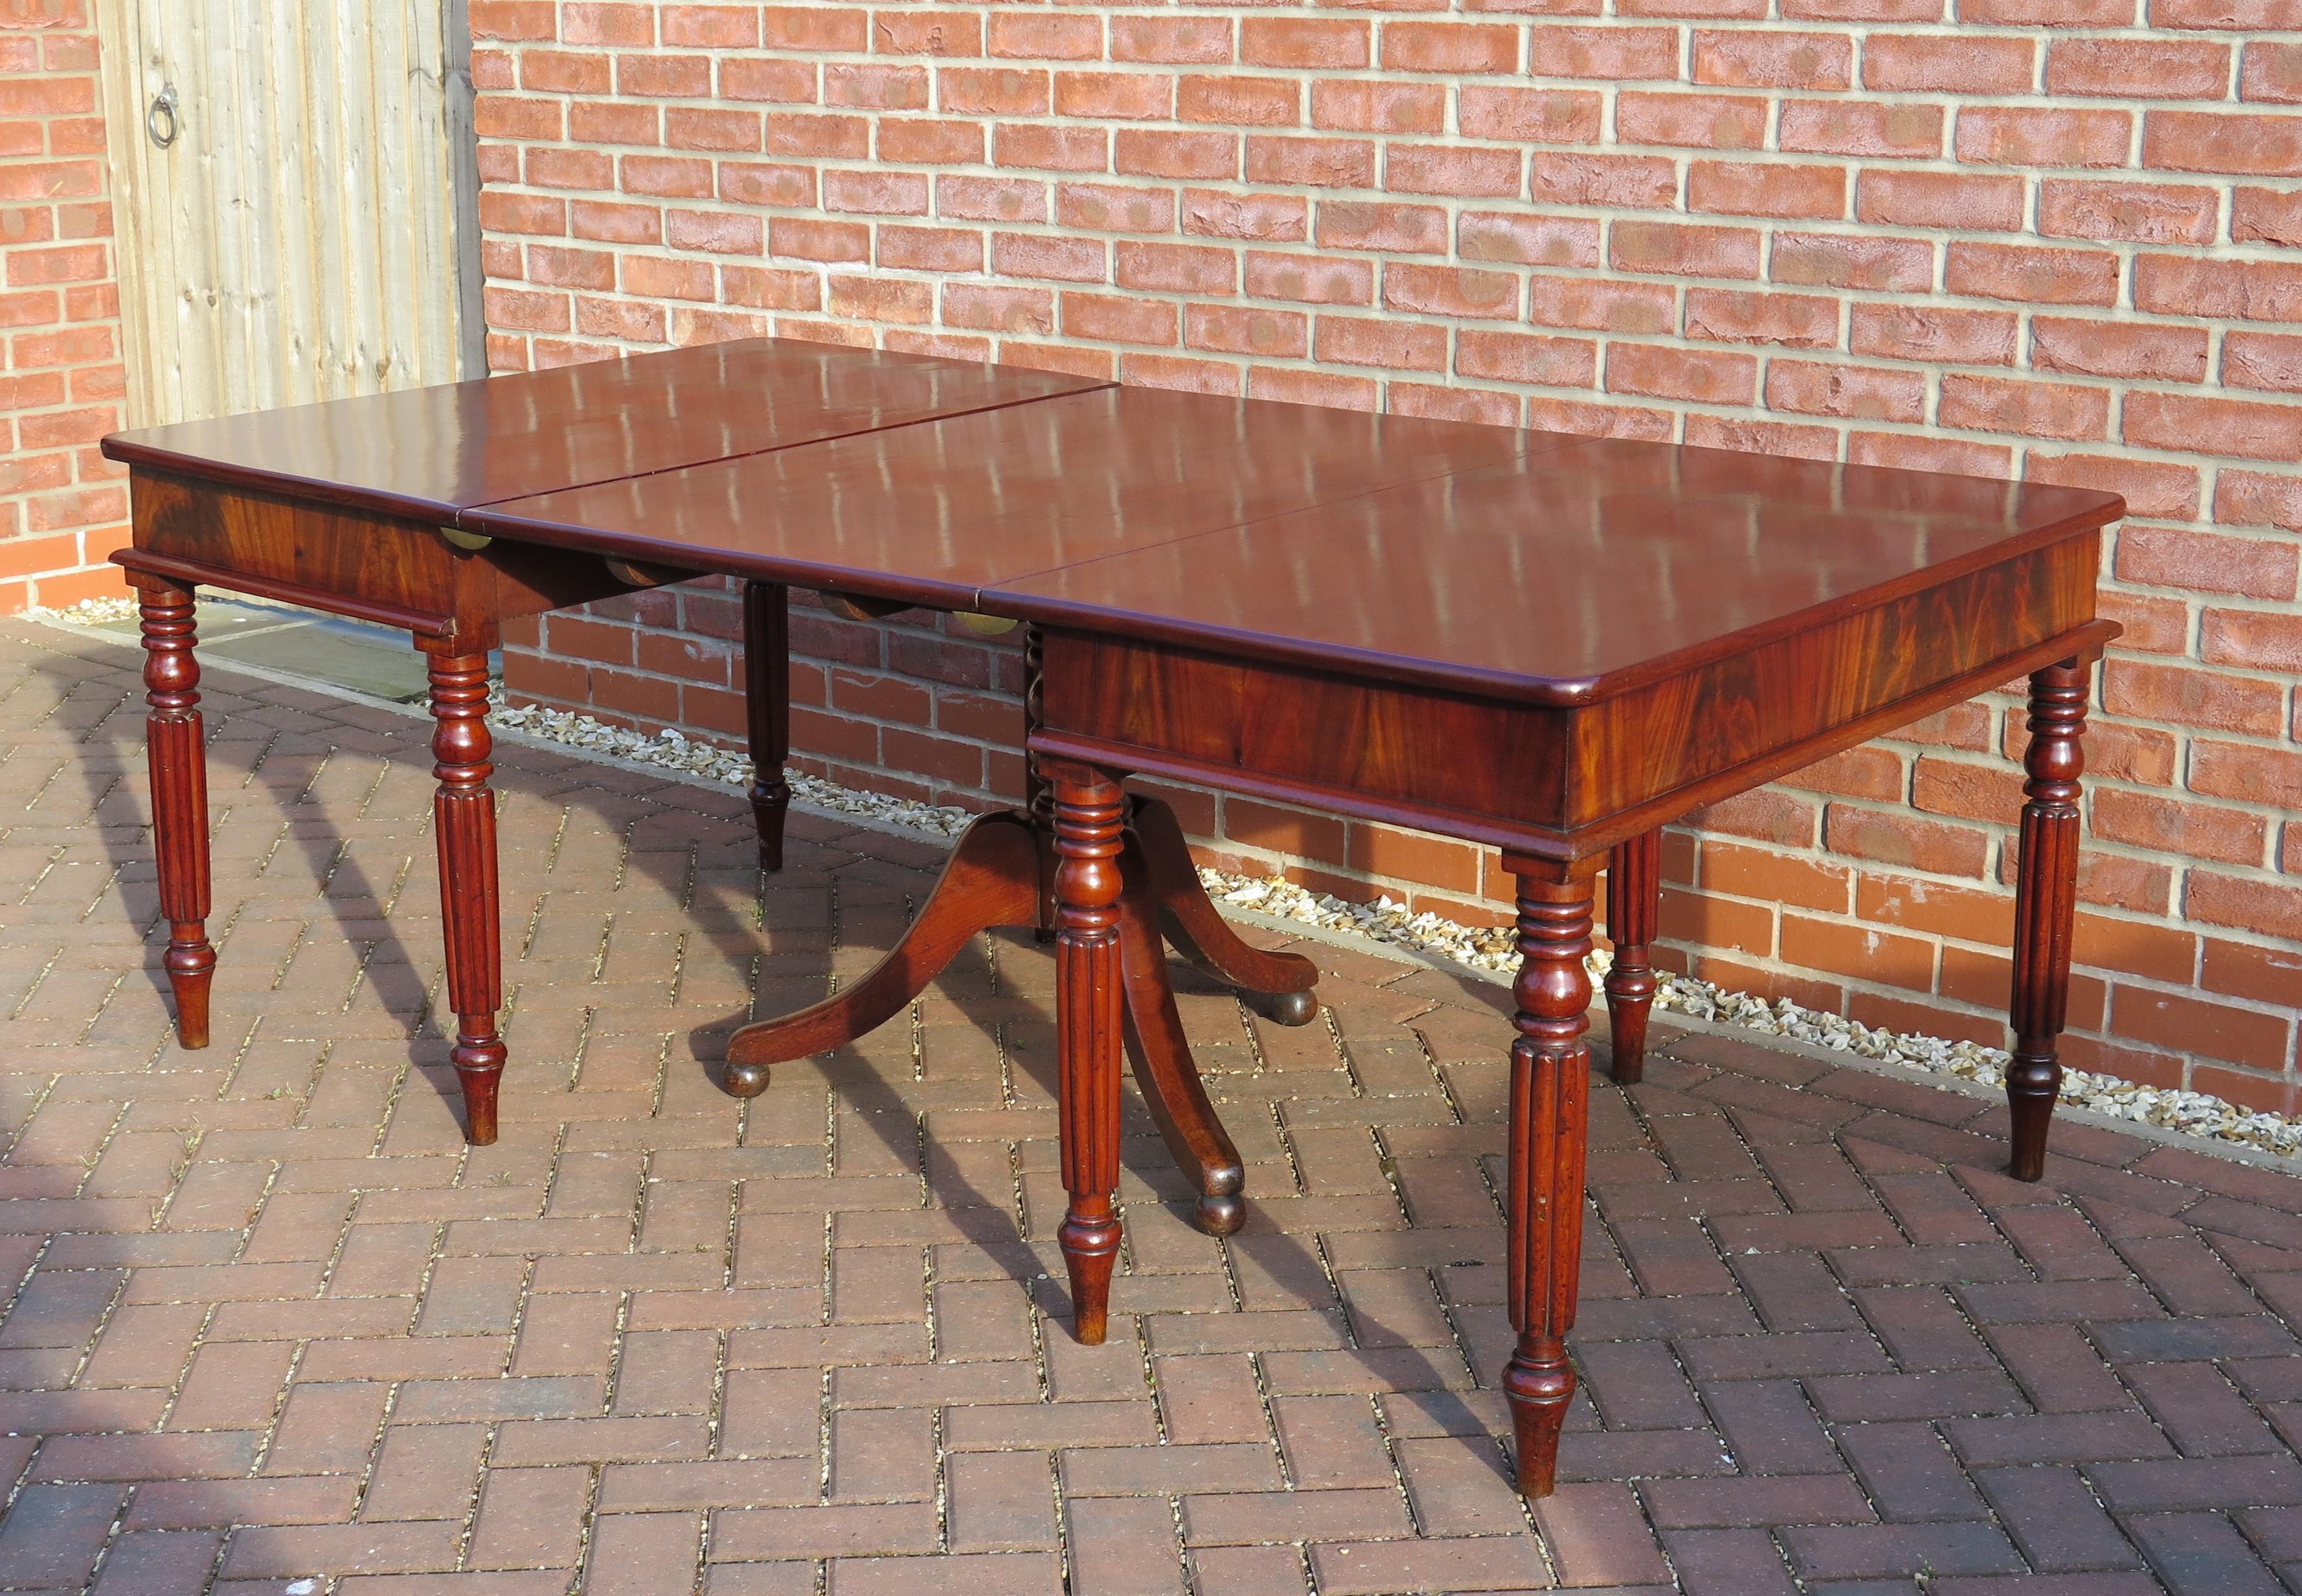 This is a good quality English Dining Table made from hardwood, in the period of George III, during the very early 19th Century, late Georgian, early Regency period. circa 1810.

This table will seat 8 people comfortably and an occasional 10 people,